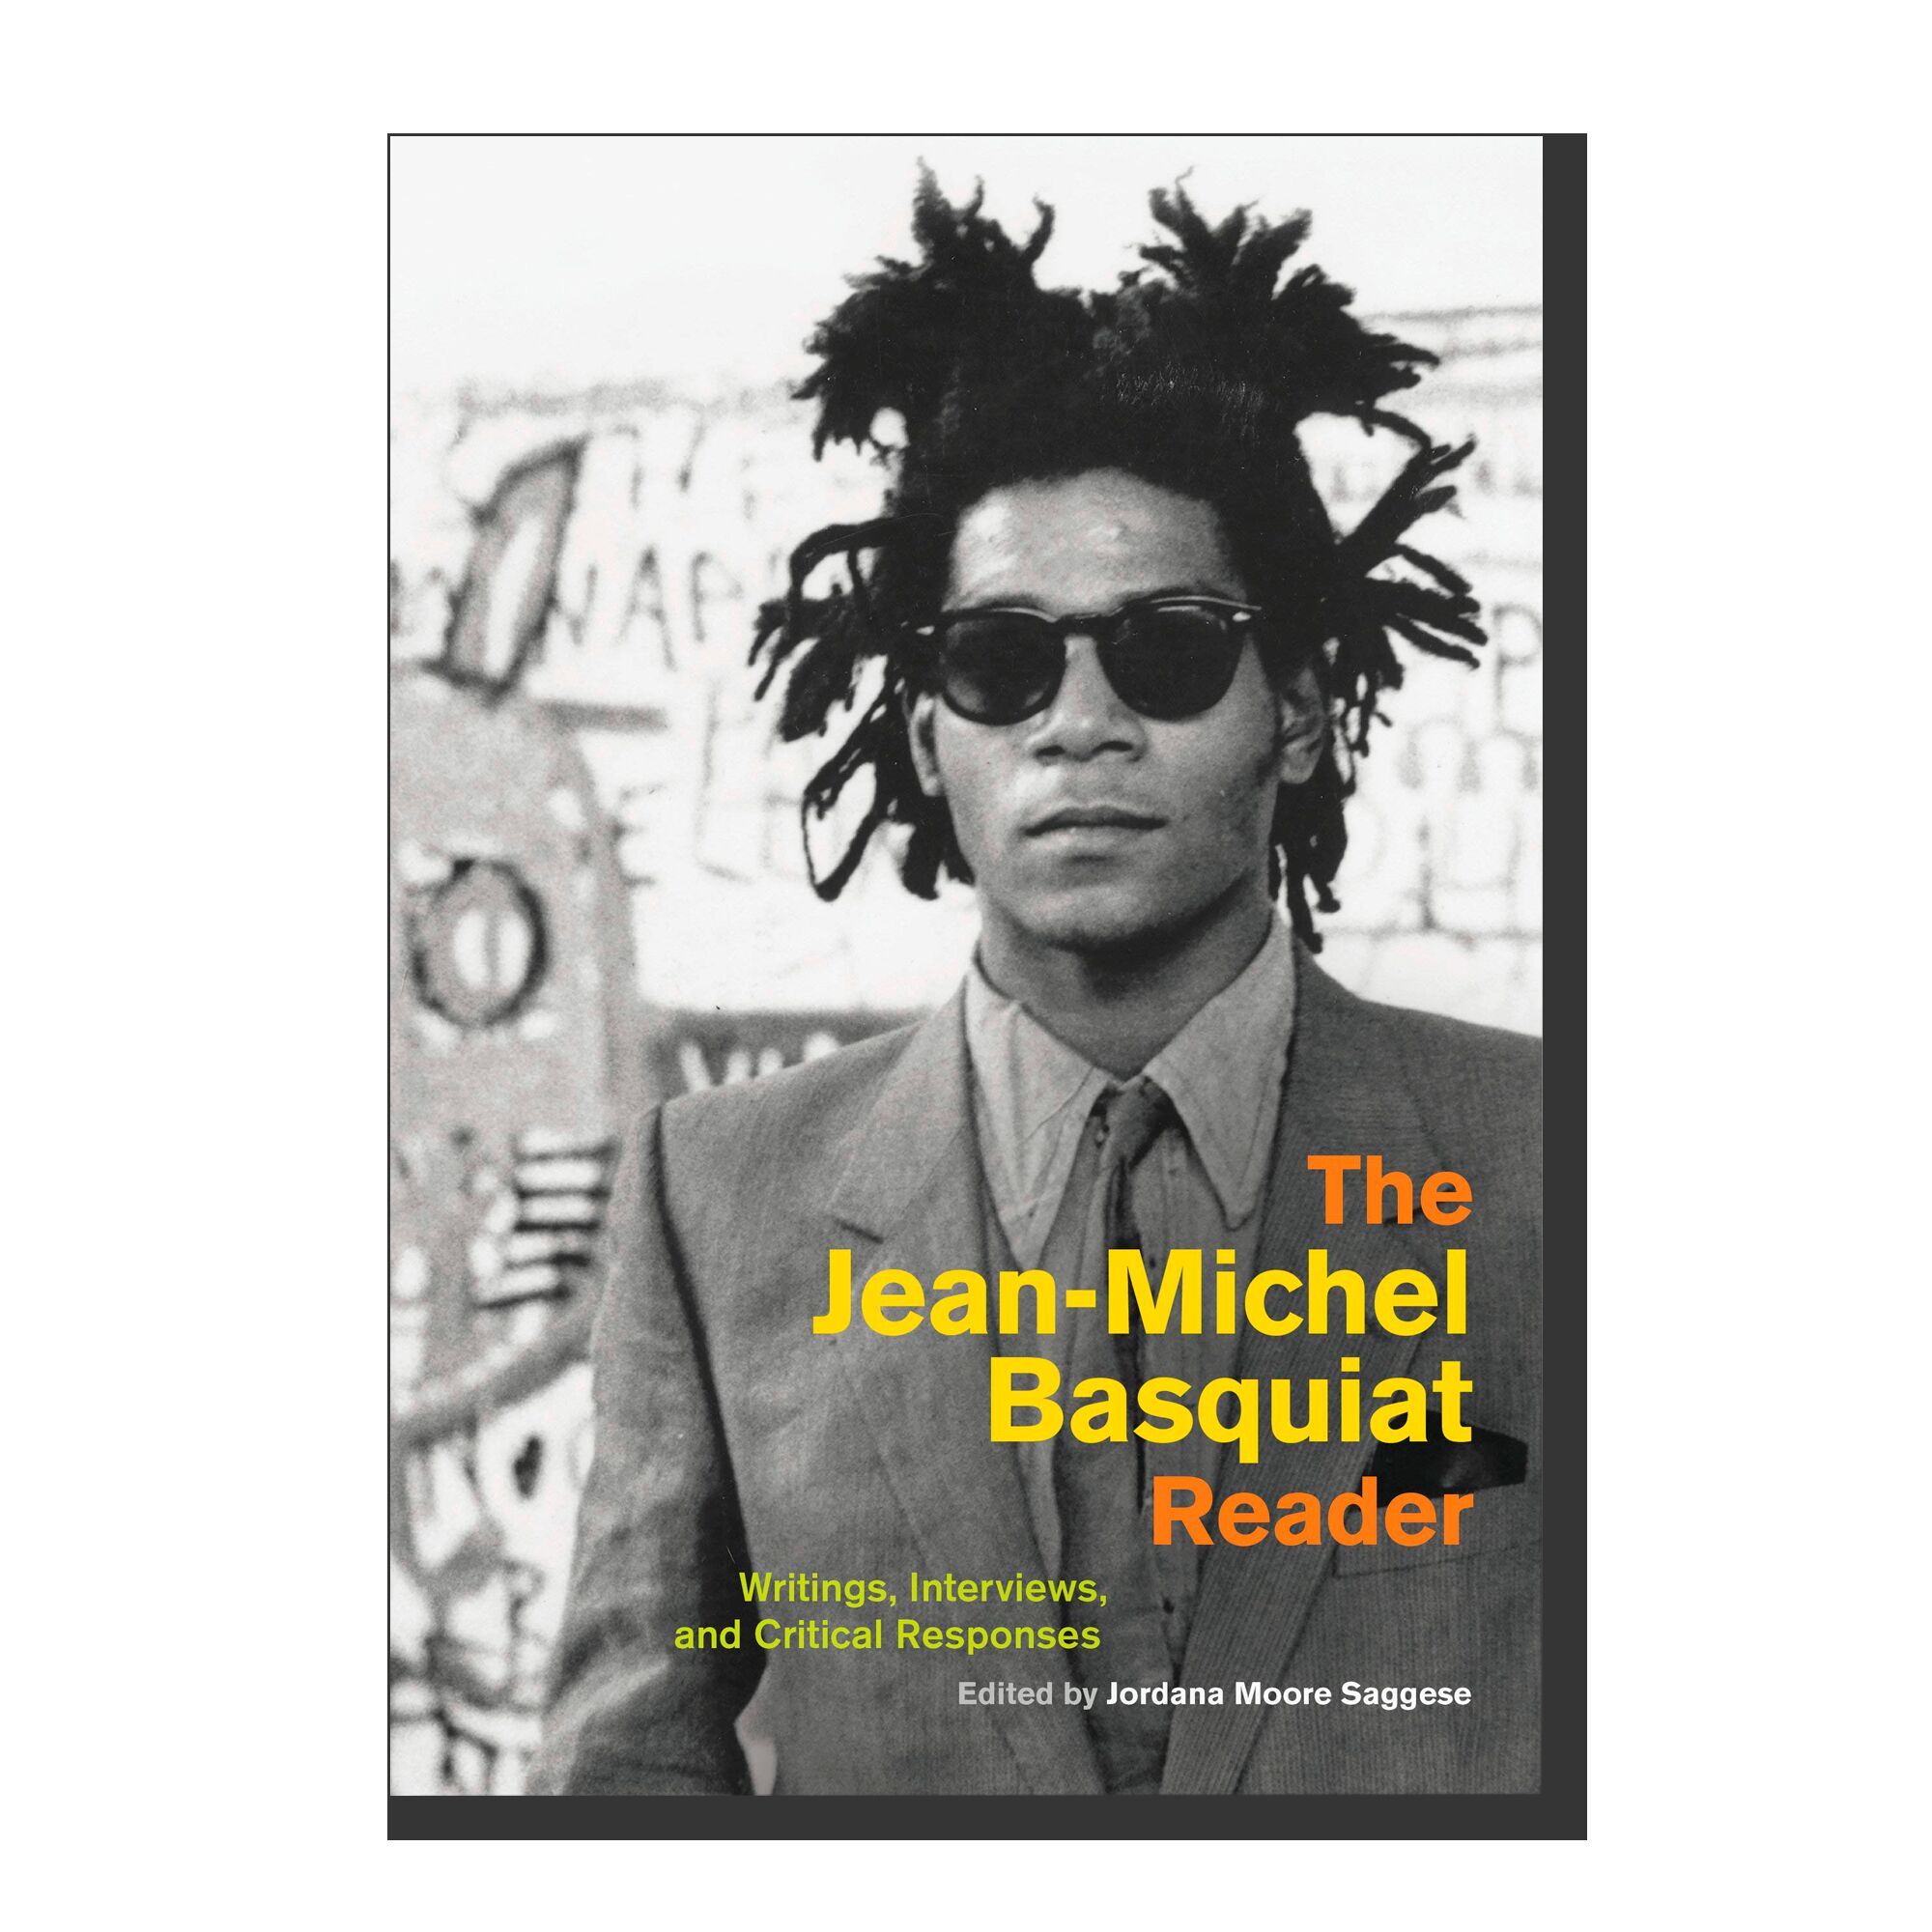 The Jean-Michel Basquiat Reader: Writings, Interviews, and Critical Responses